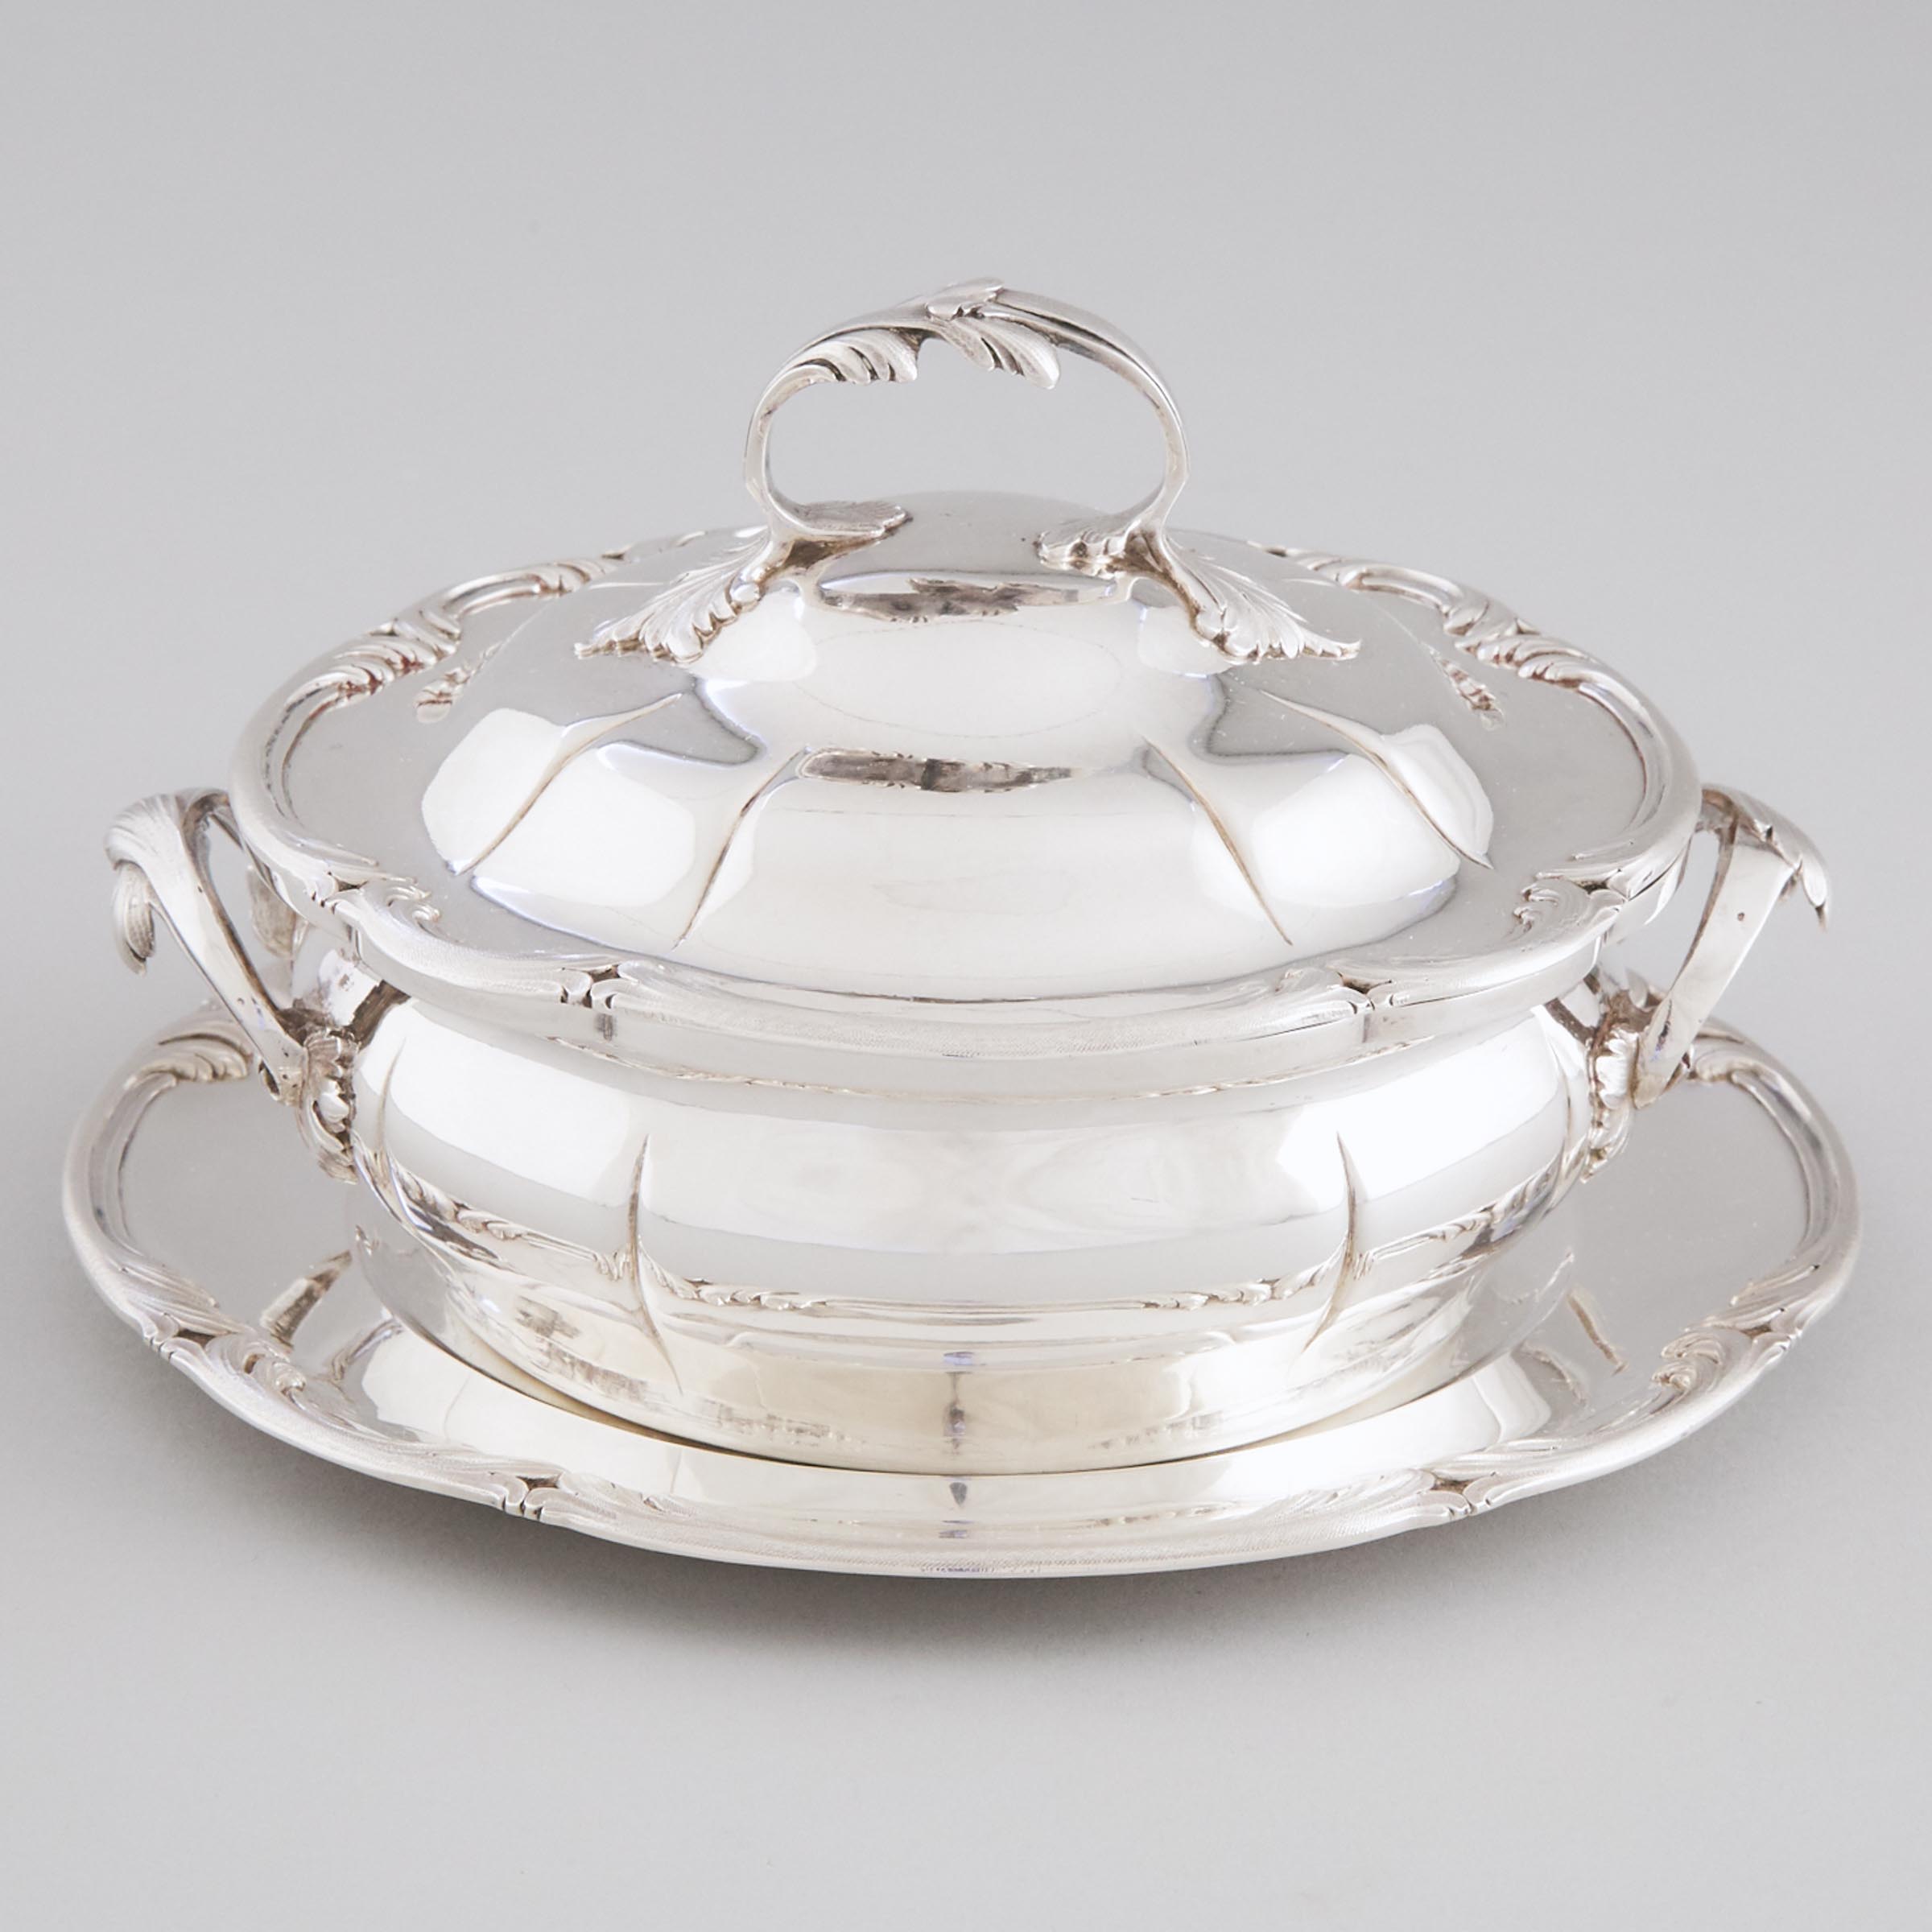 French Silver Two-Handled Covered Bowl and Stand, Odiot, Paris, late 19th century 